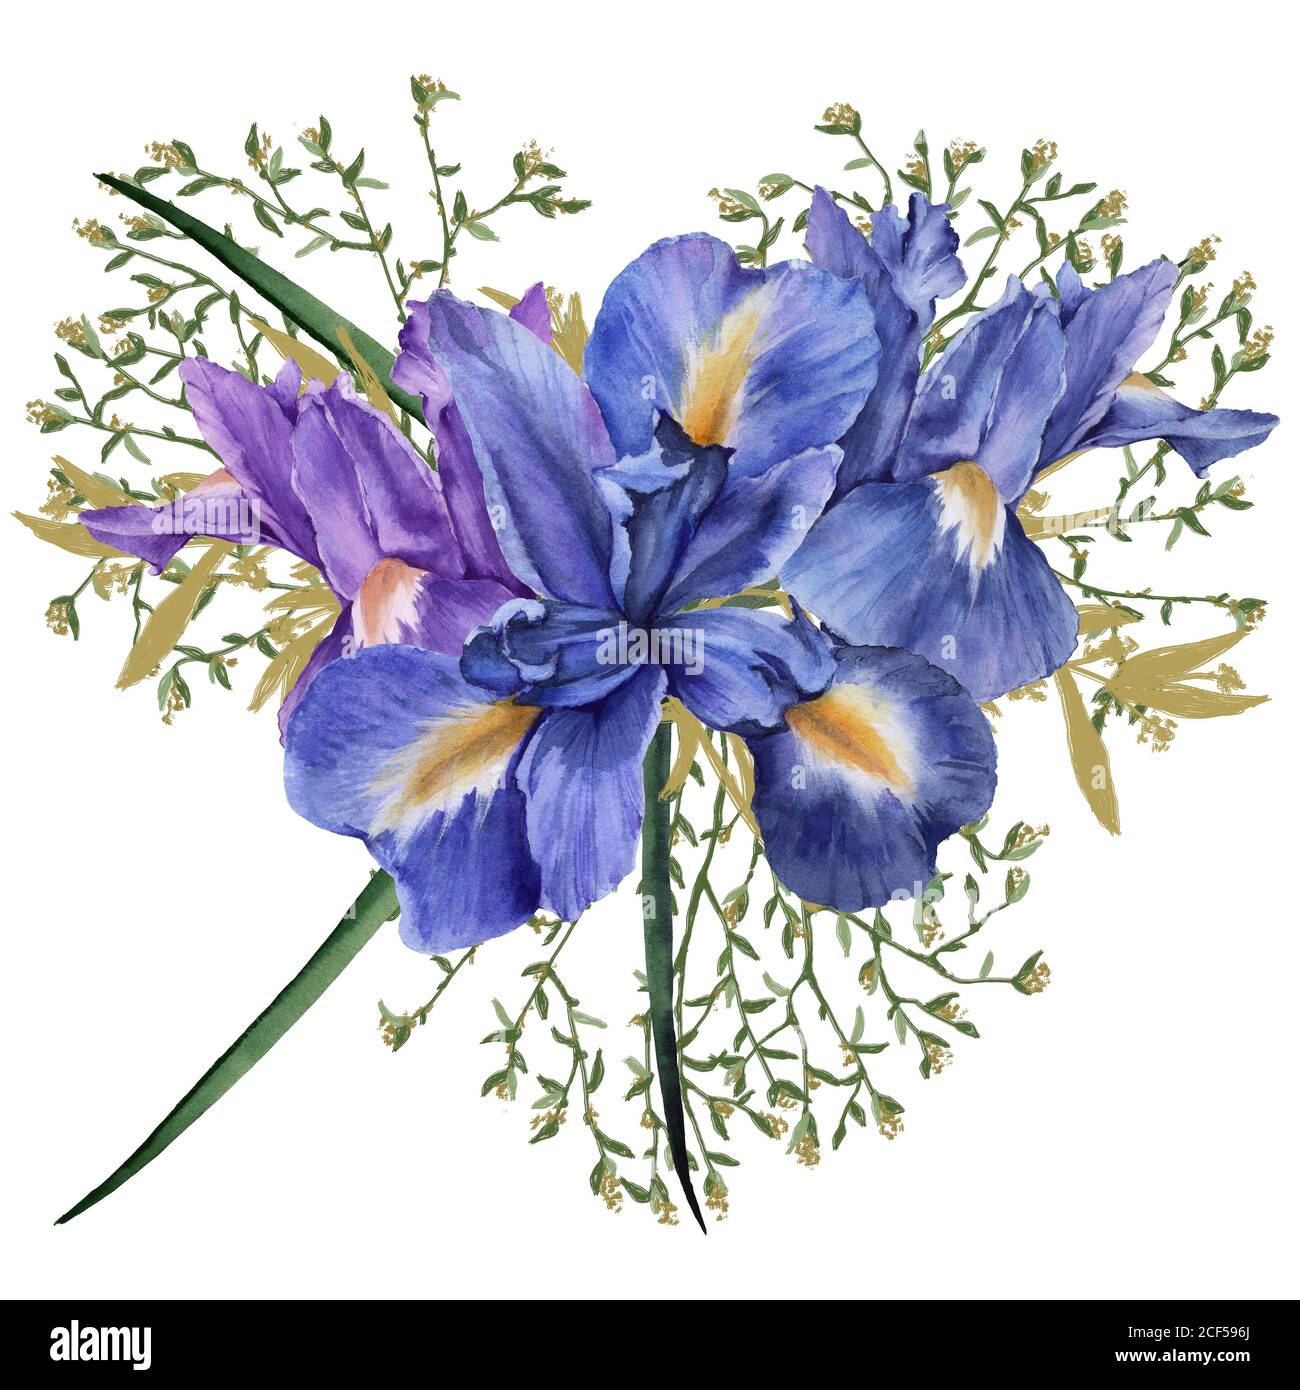 Composition of iris flowers with foliage. Isolated watercolor illustration. Stock Photo